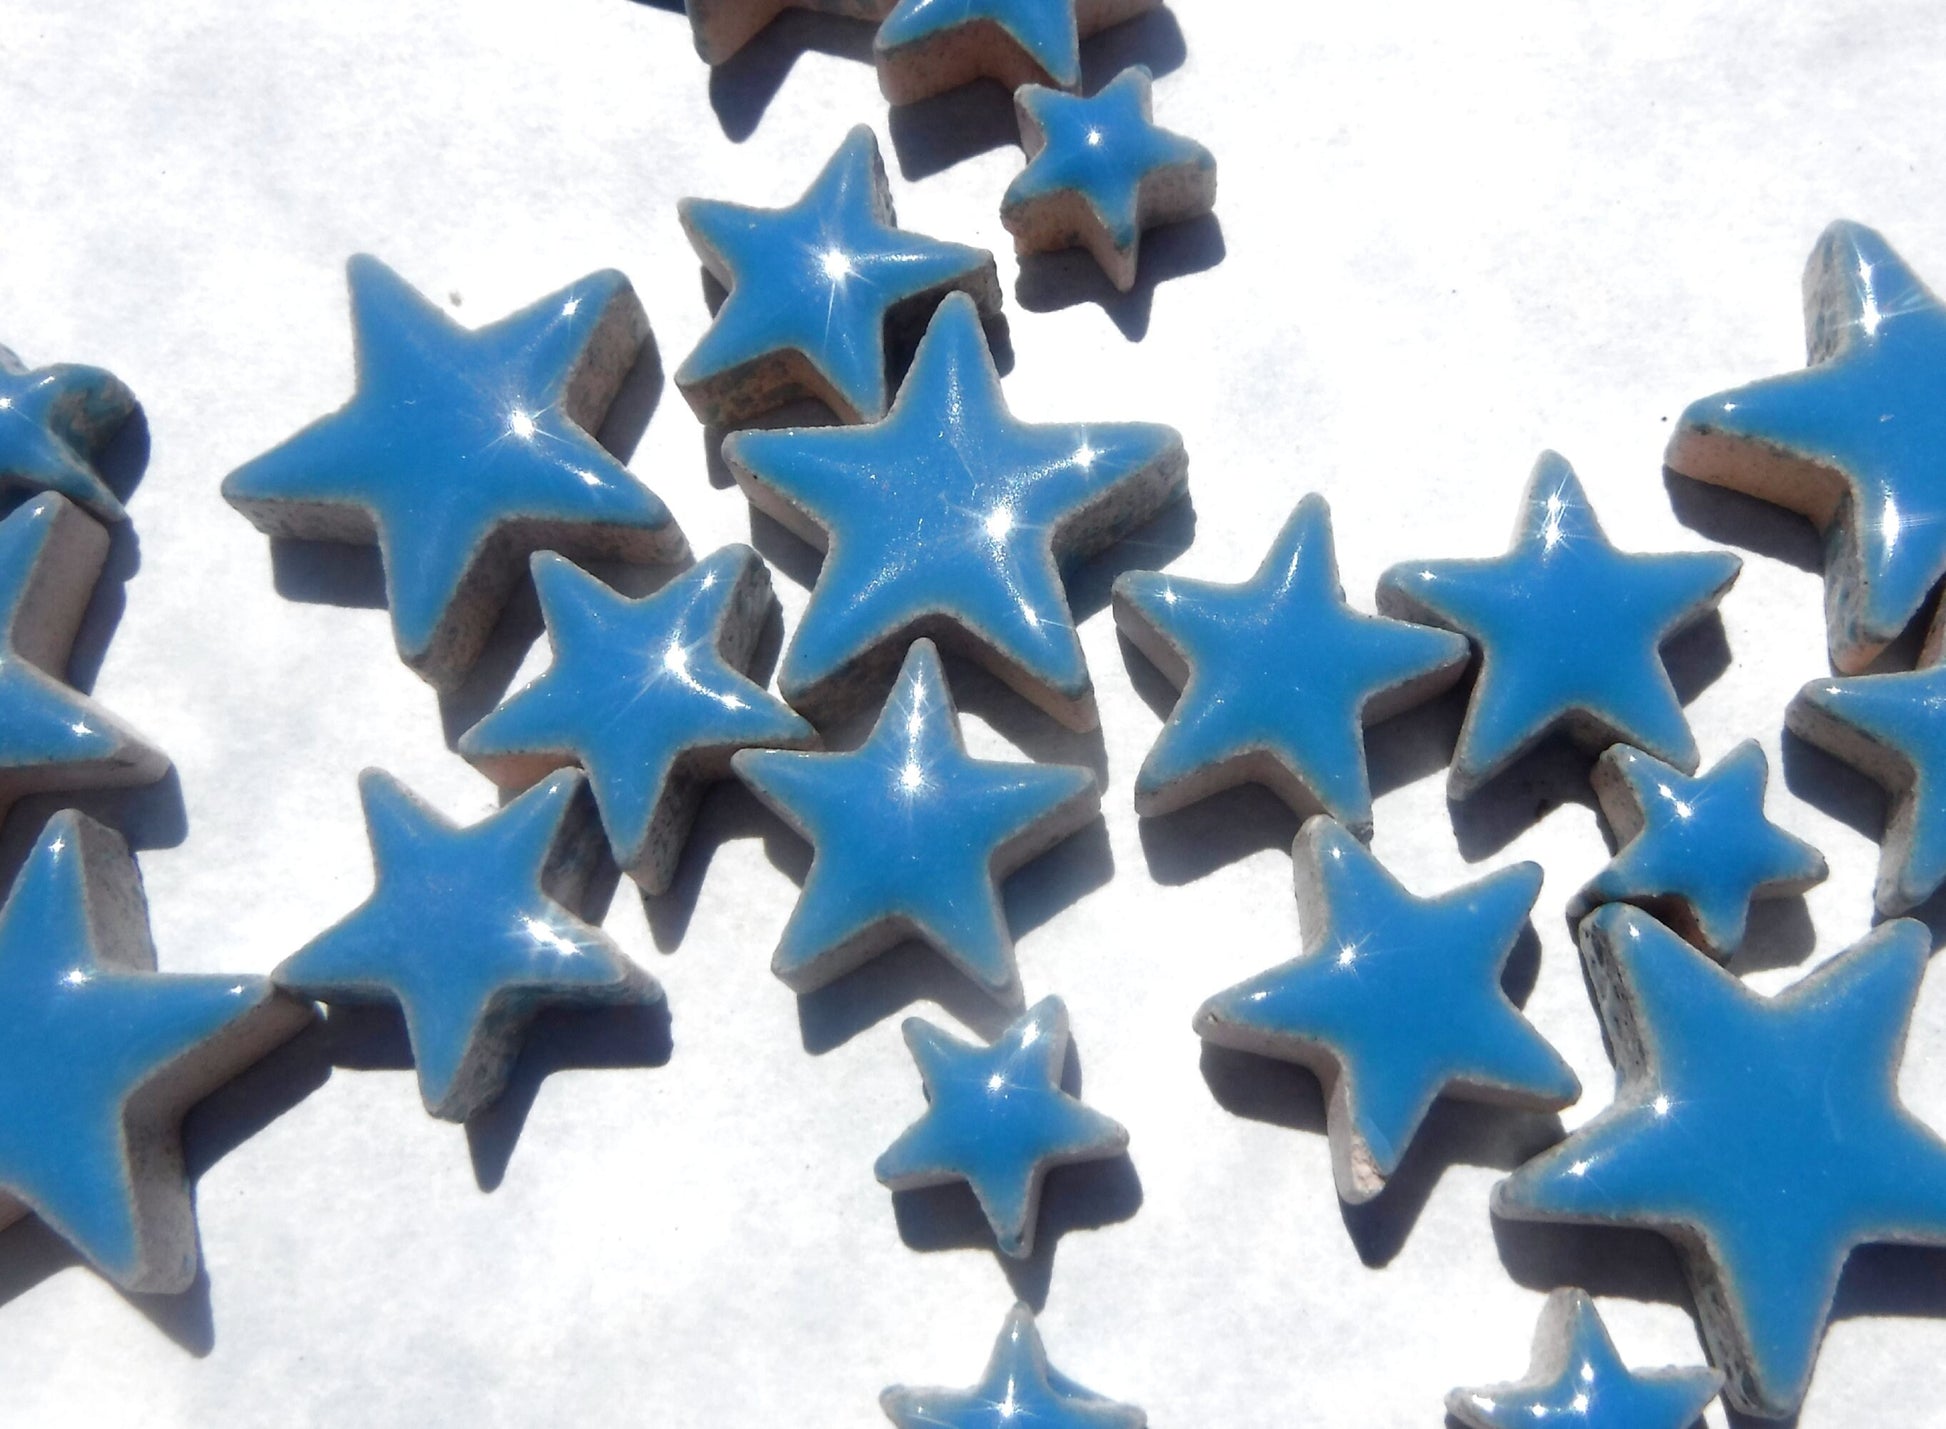 Mediterranean Blue Stars Mosaic Tiles - 50g Ceramic in Mix of 3 Sizes - 20mm, 15mm, 10mm - Thalo Blue